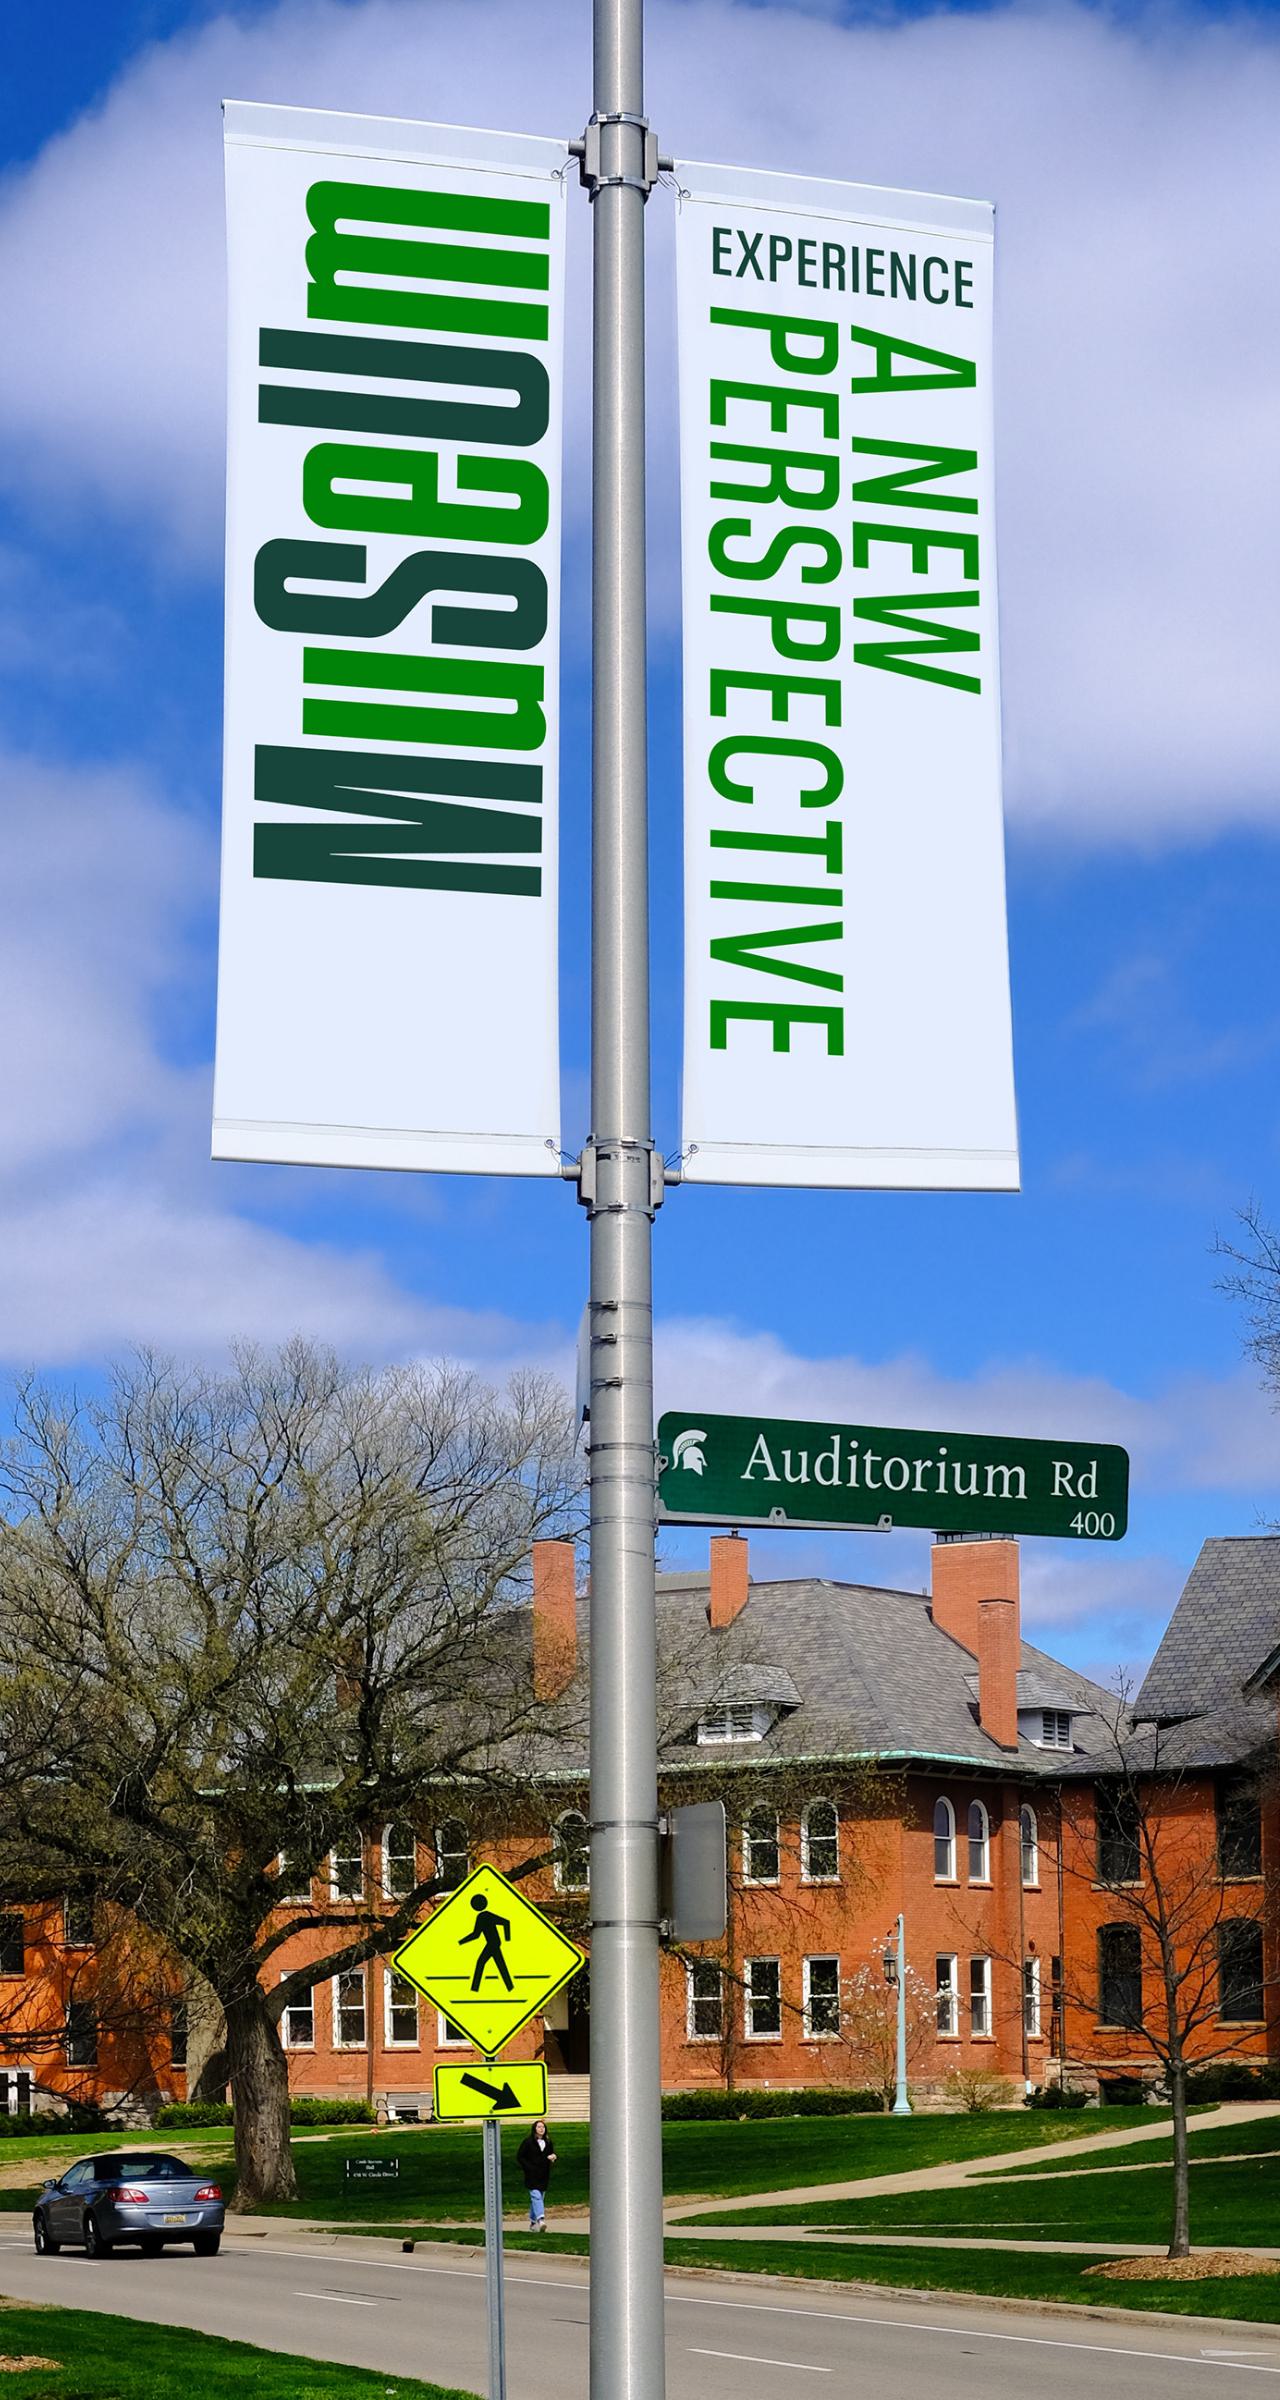 street banners with the new logo and verbal identity